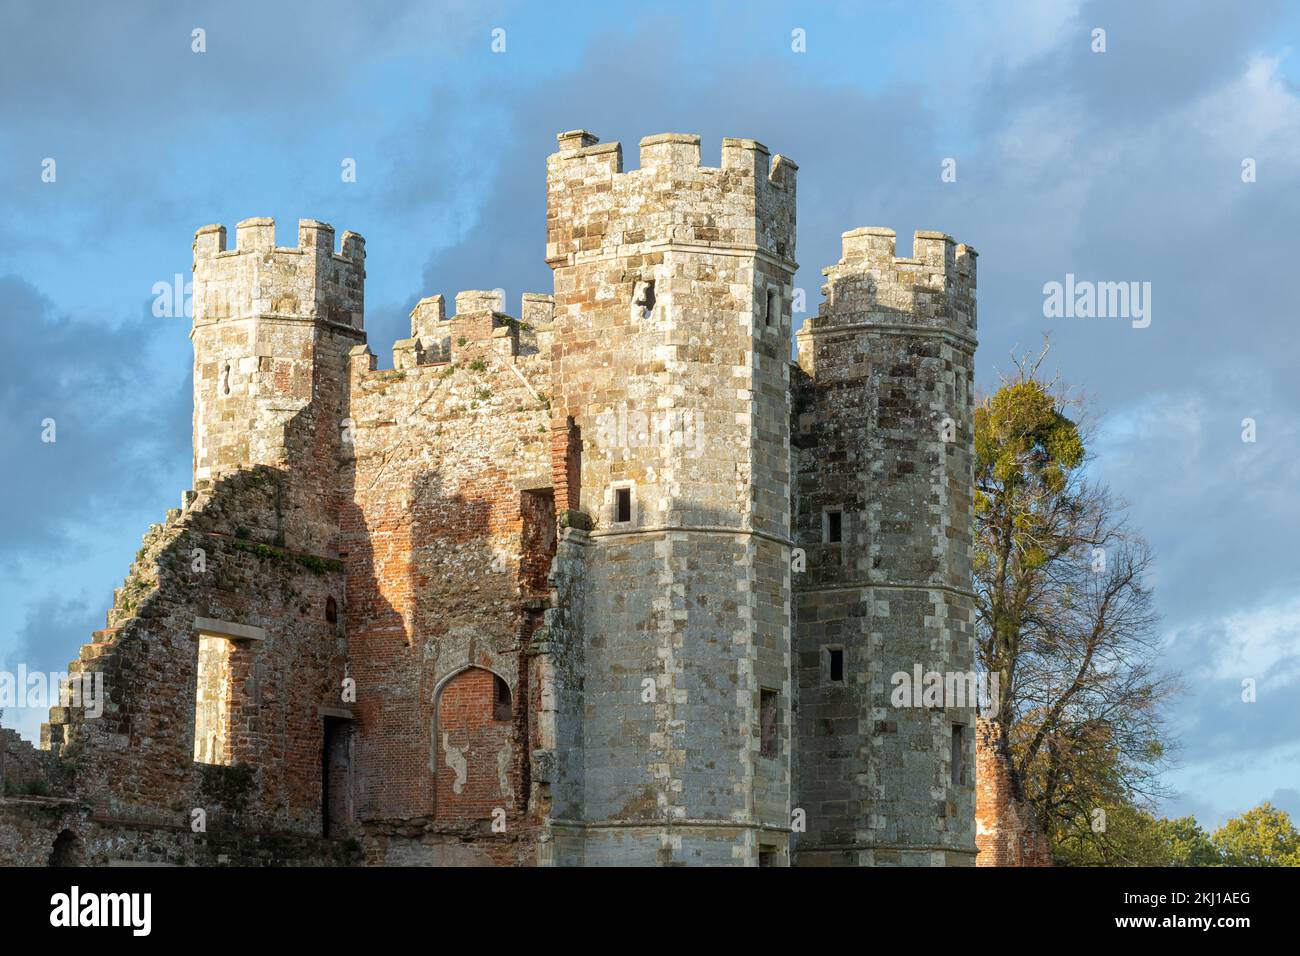 The Cowdray House Ruins in Cowdray Park, Midhurst, West Sussex, England, UK, during November Stock Photo